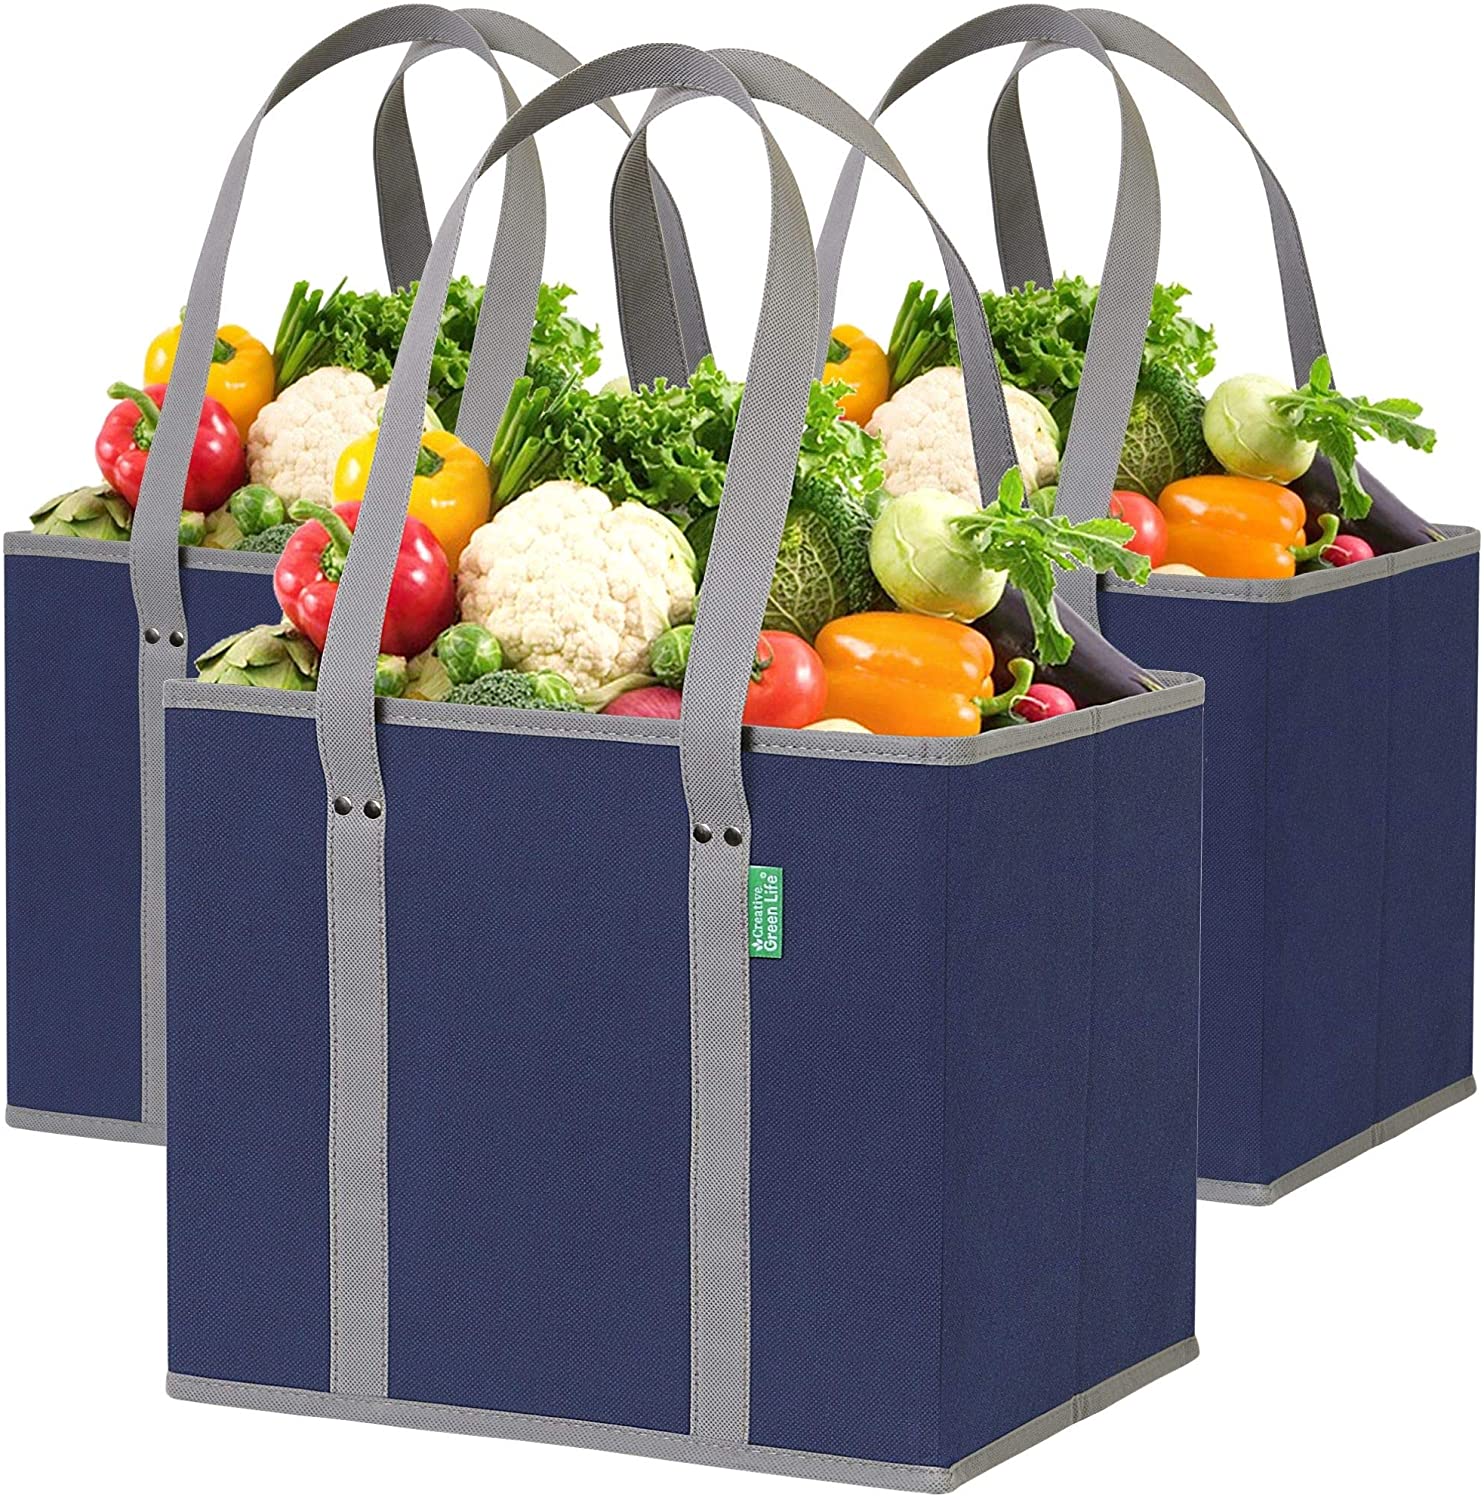 Heavy Duty Collapsible and Reusable Shopping Box Bags with Fold Out  Reinforced Bottom (Set of 3)